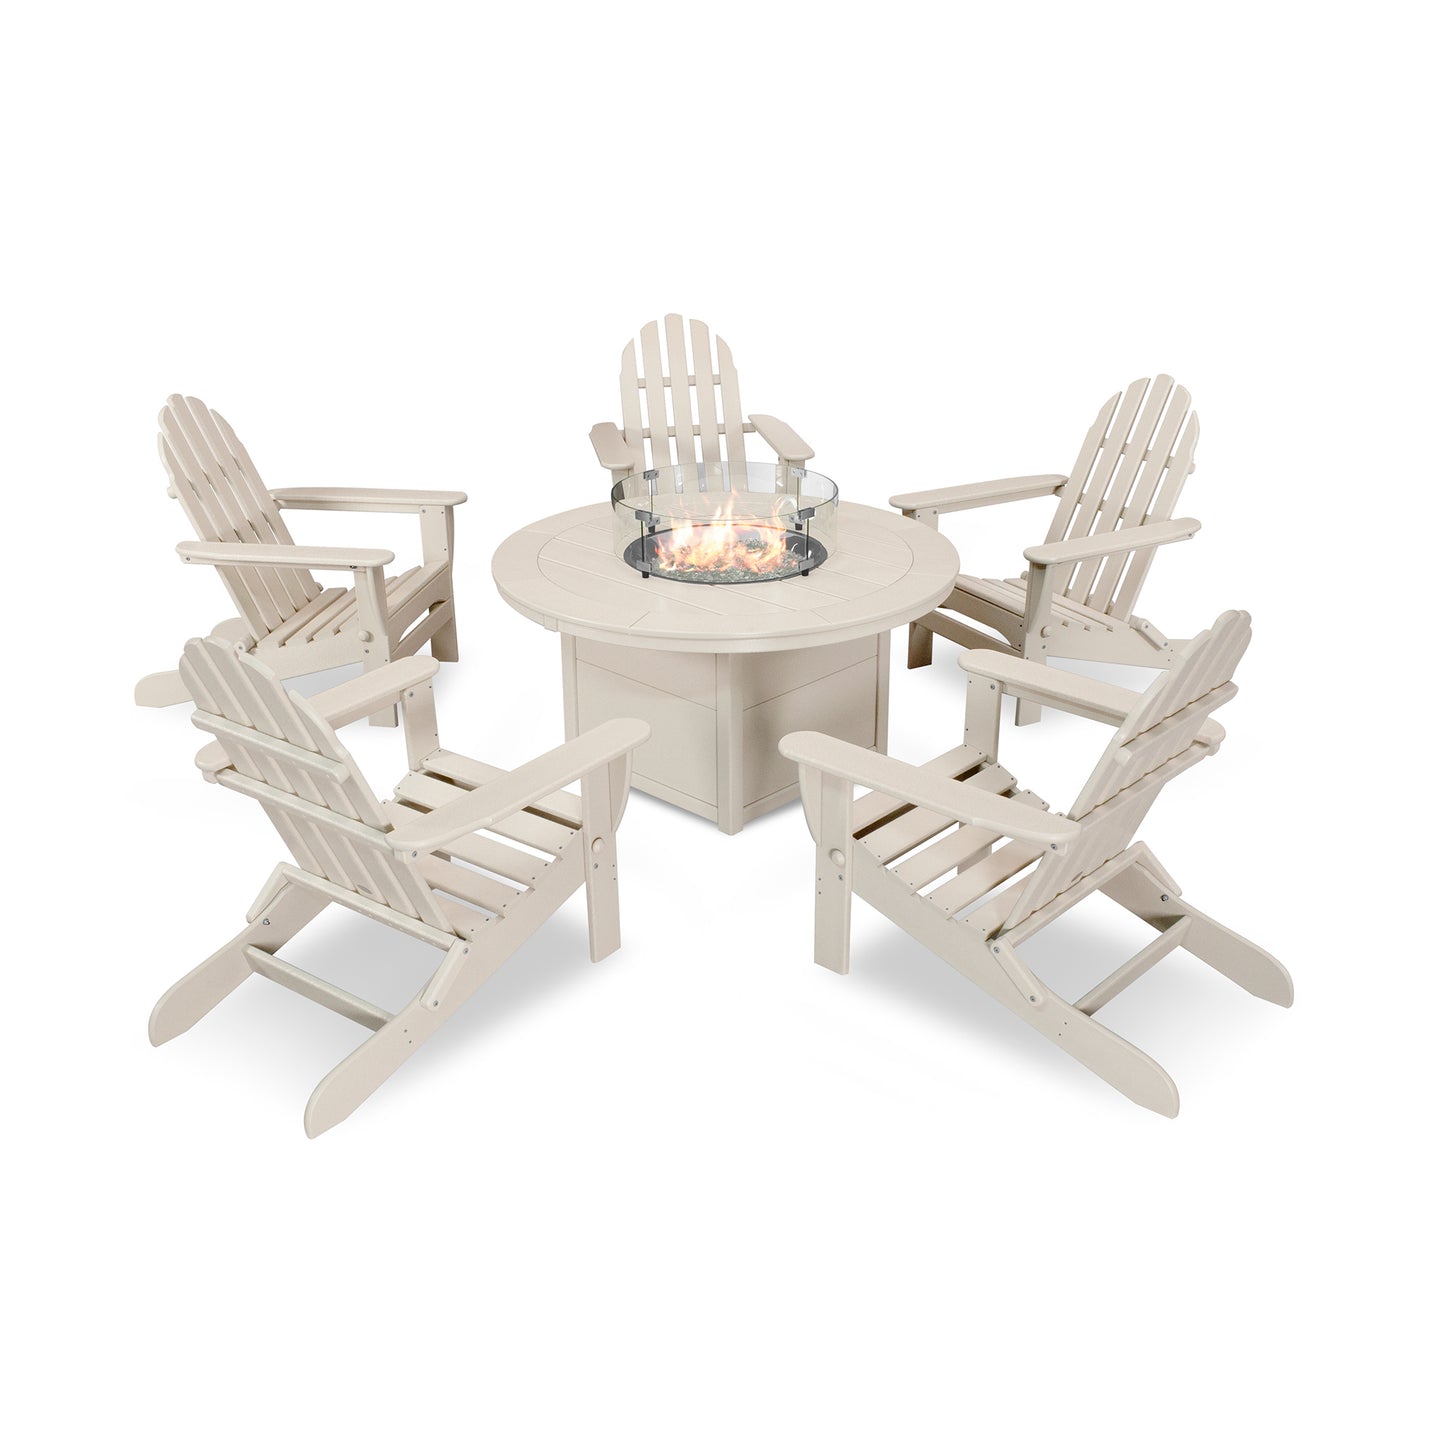 Five beige POLYWOOD Classic Folding Adirondack chairs arranged around a fire pit table, set against a white background.